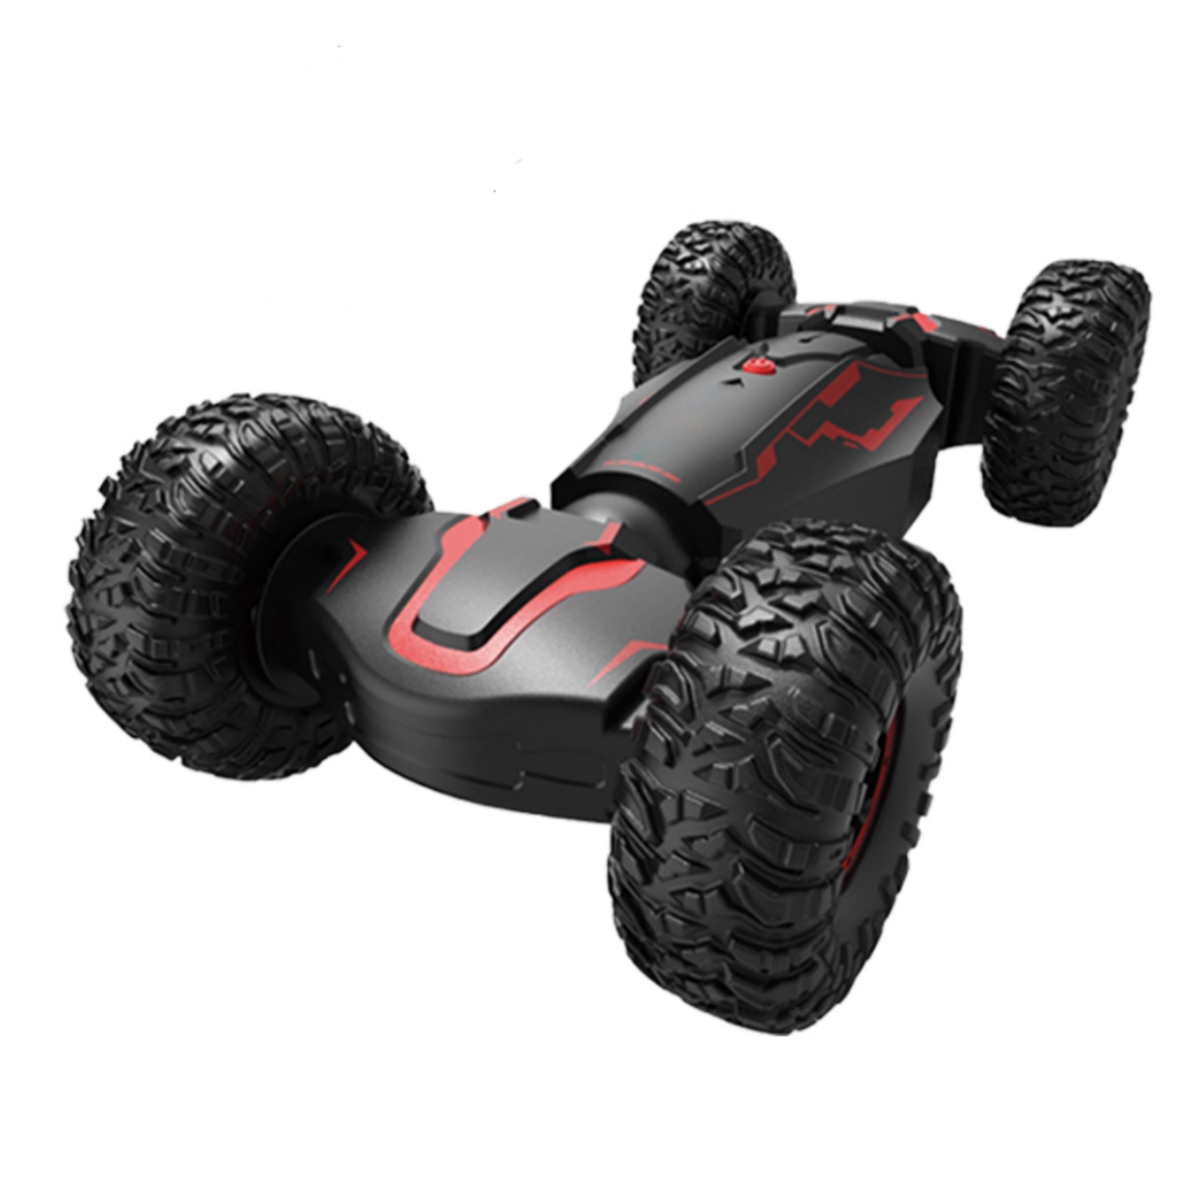 2.4G Remote Control Car With Spray Watch Dual Control Twist Stunt Vehicle Rechargeable Rc Drift Car For For Kids Birthday Christmas Gifts